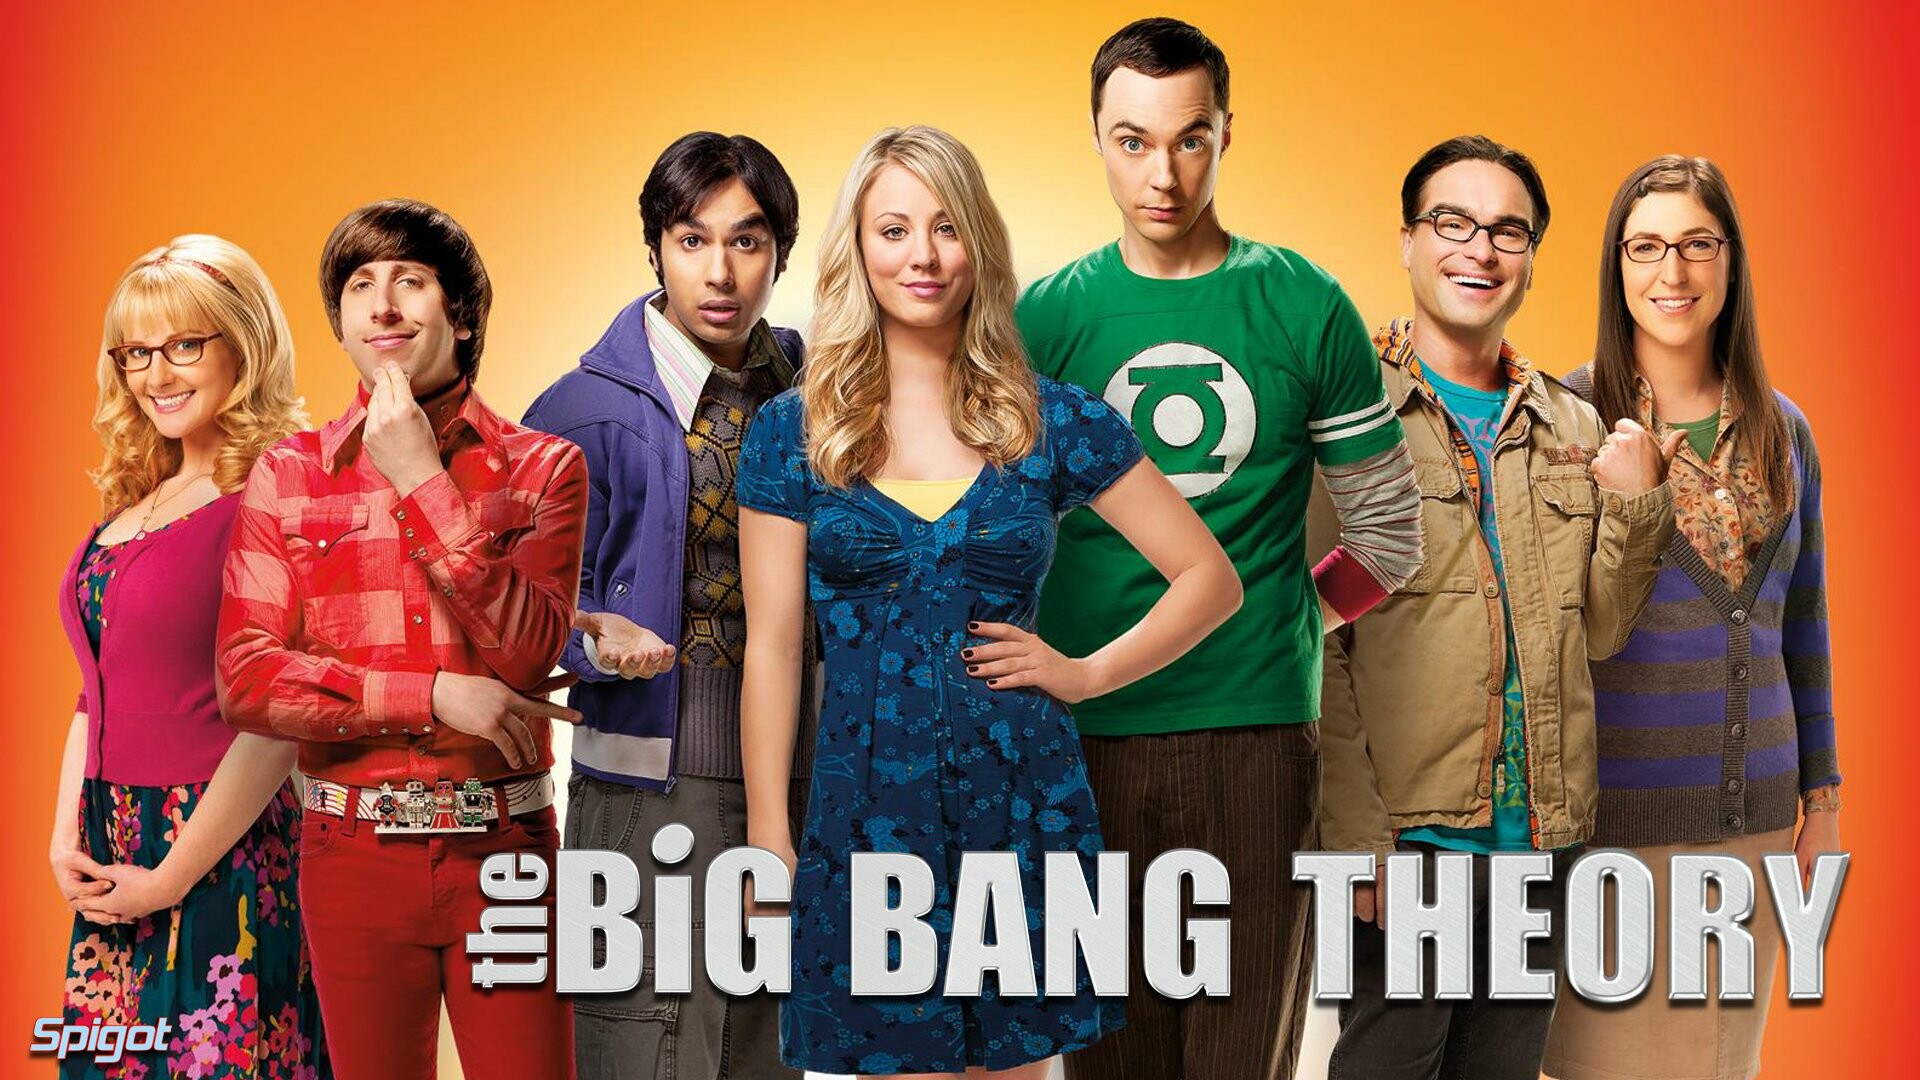 The Big Bang Theory: A pair of socially awkward theoretical physicists meet their new neighbor Penny, who is their polar opposite. 1920x1080 Full HD Background.